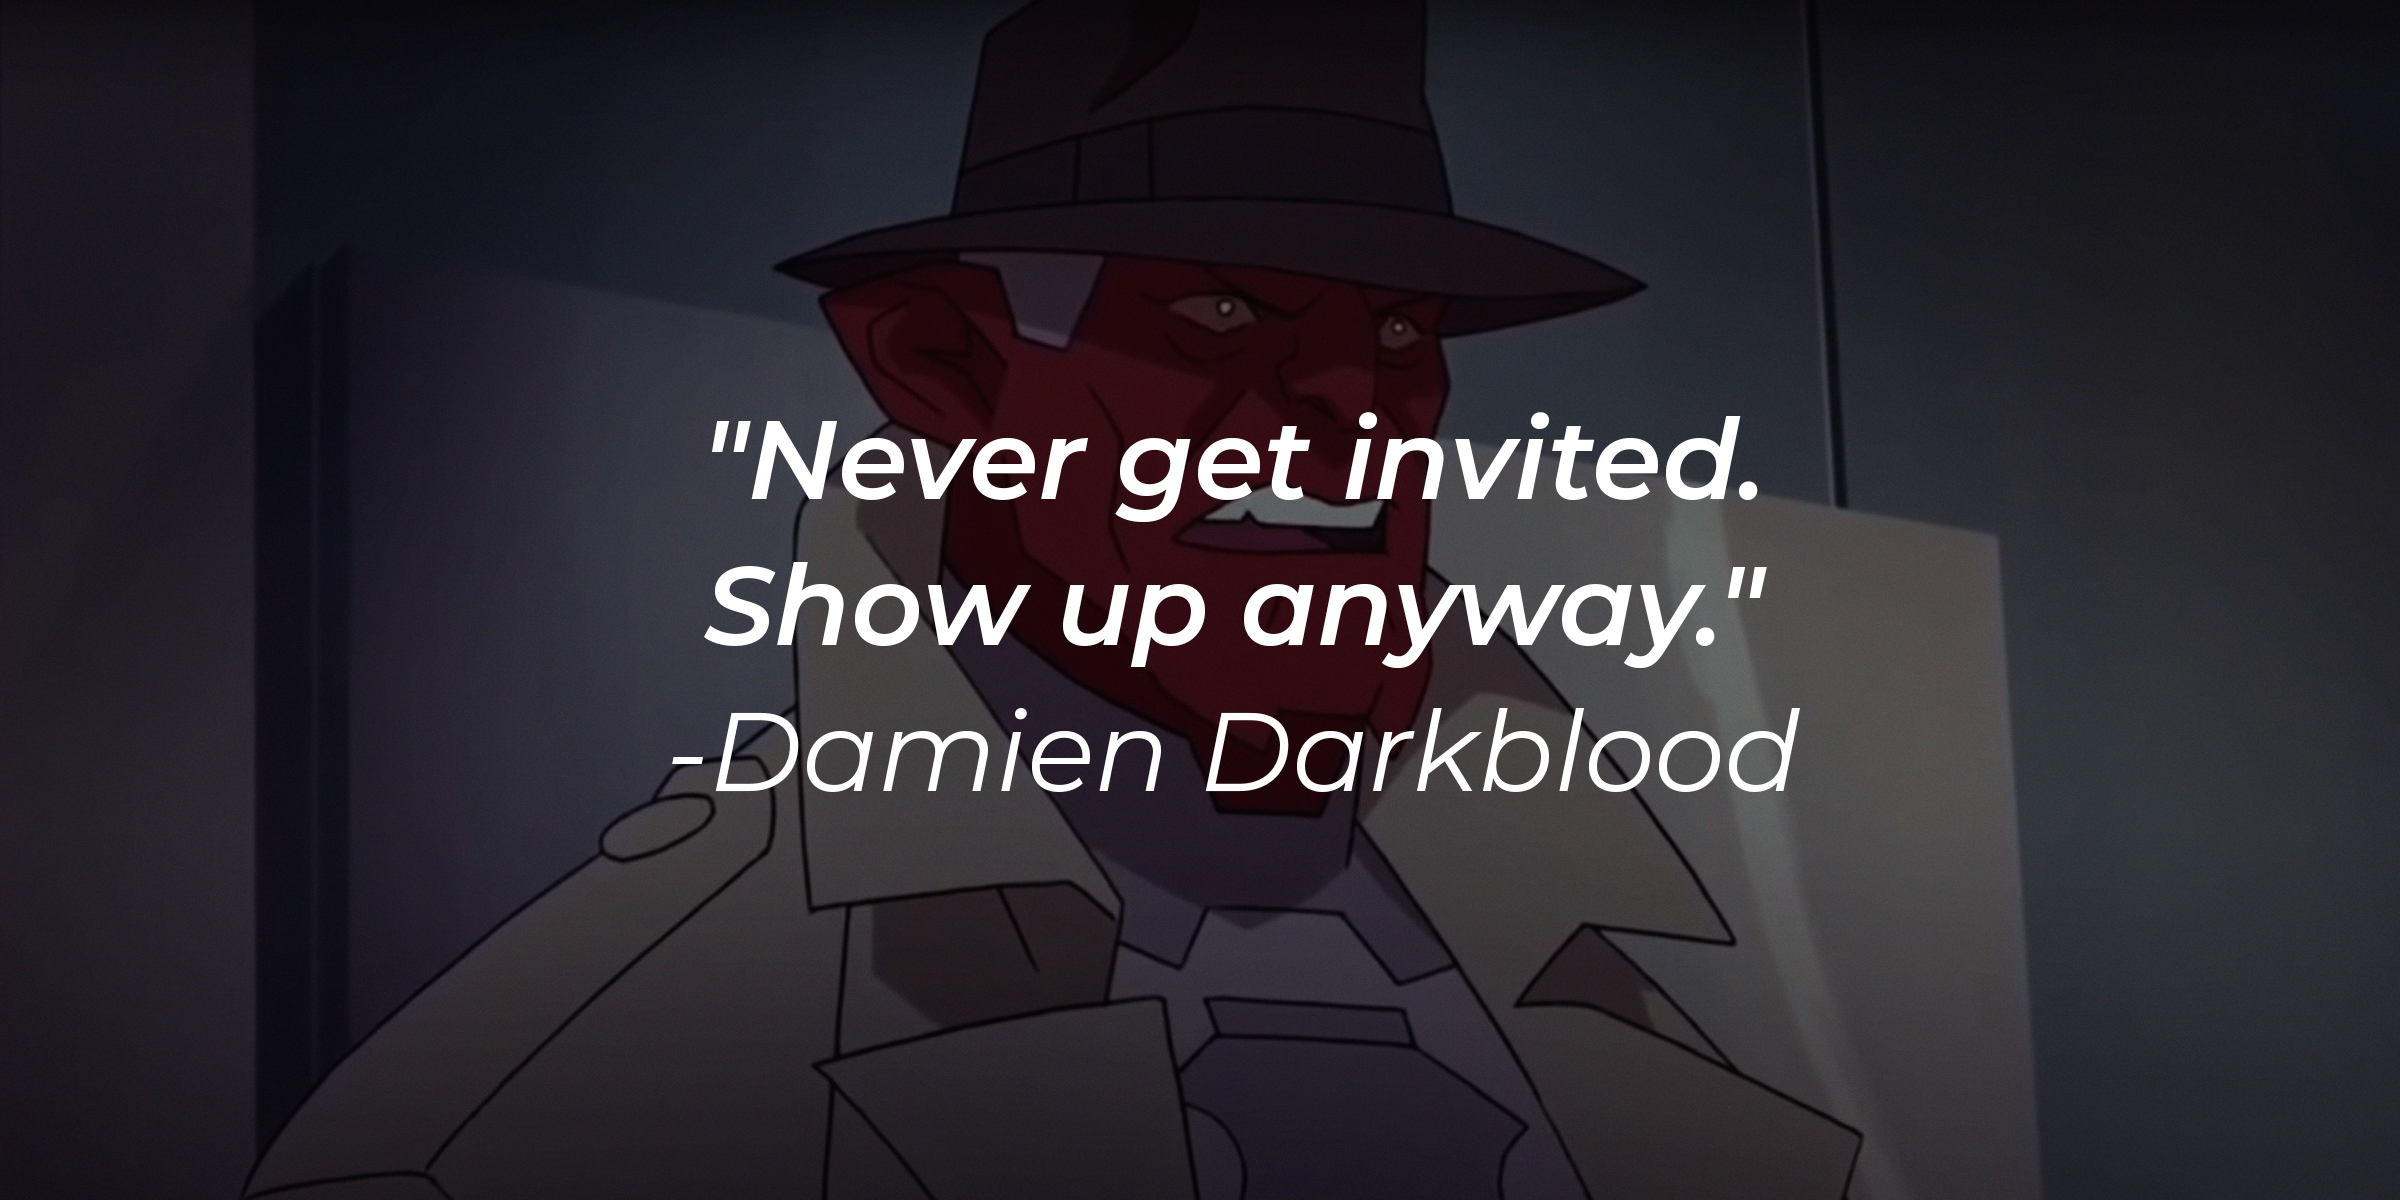 Photo of Damien Darkblood with his quote: "Never get invited. Show up anyway." | Source: Facebook.com/Invincibleuniverse